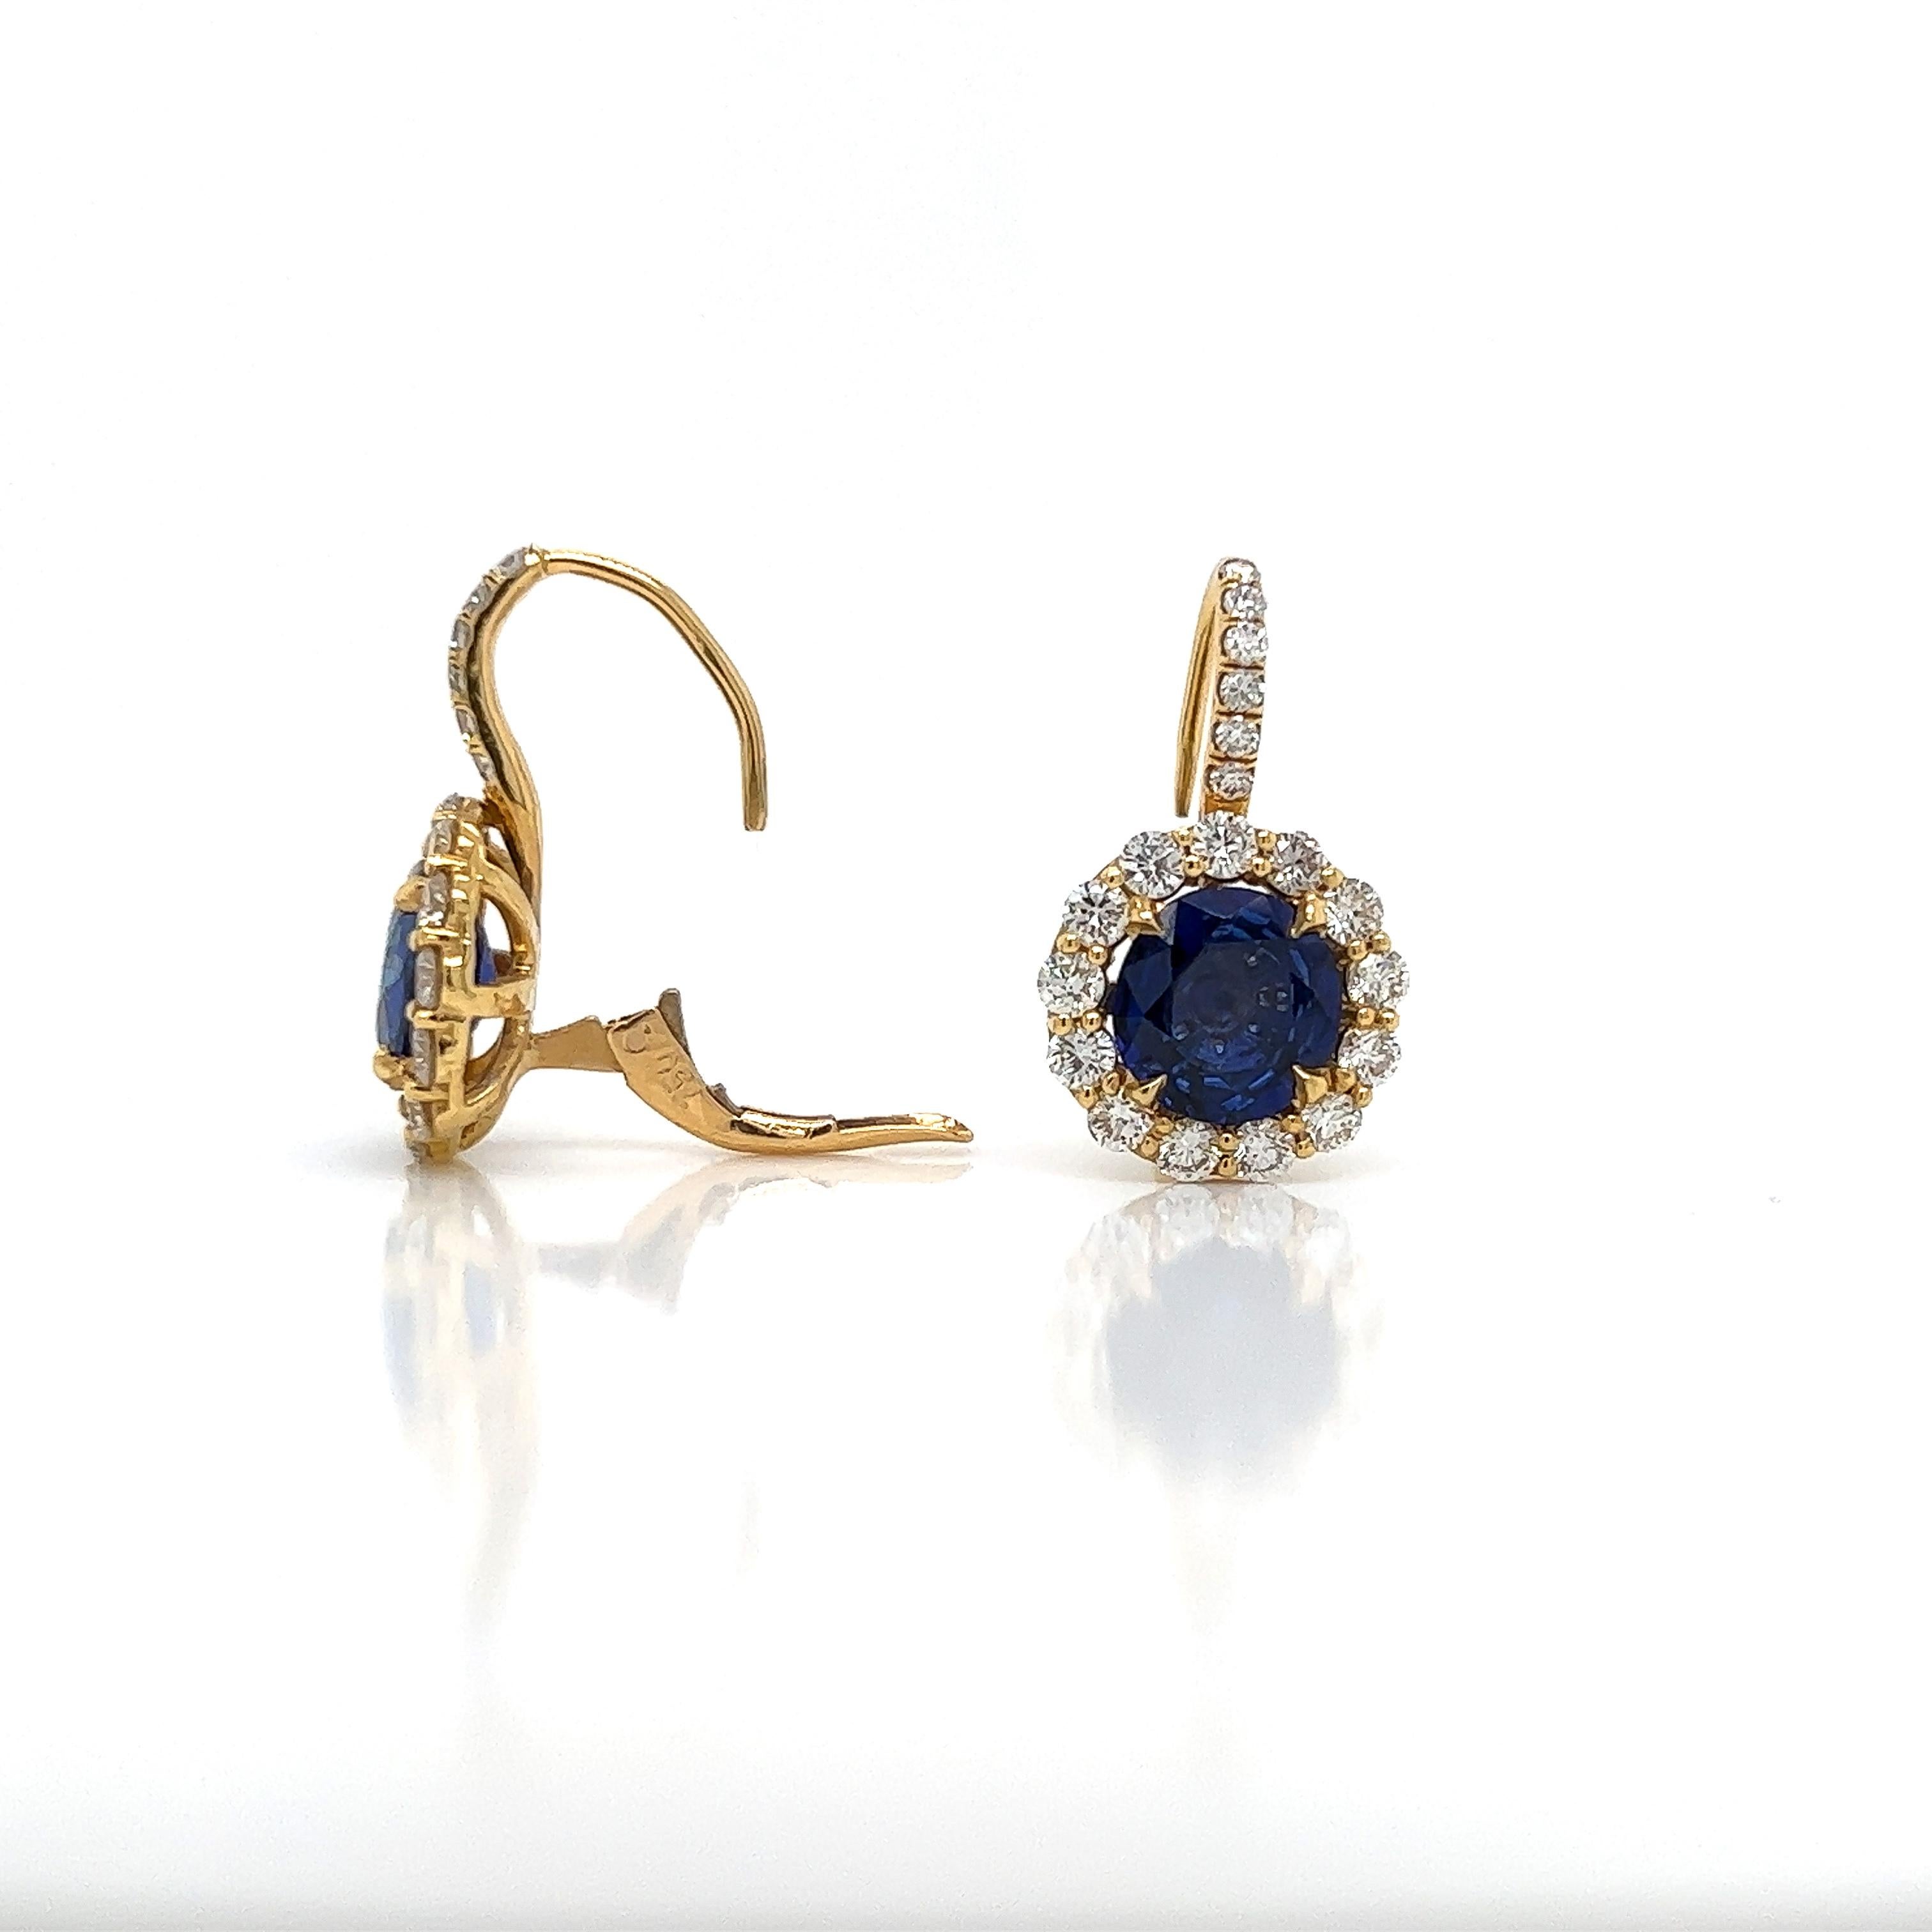 Round Cut 6.23 Total Carat Blue Sapphire and Diamond Halo Pave Earrings in 18K Gold For Sale